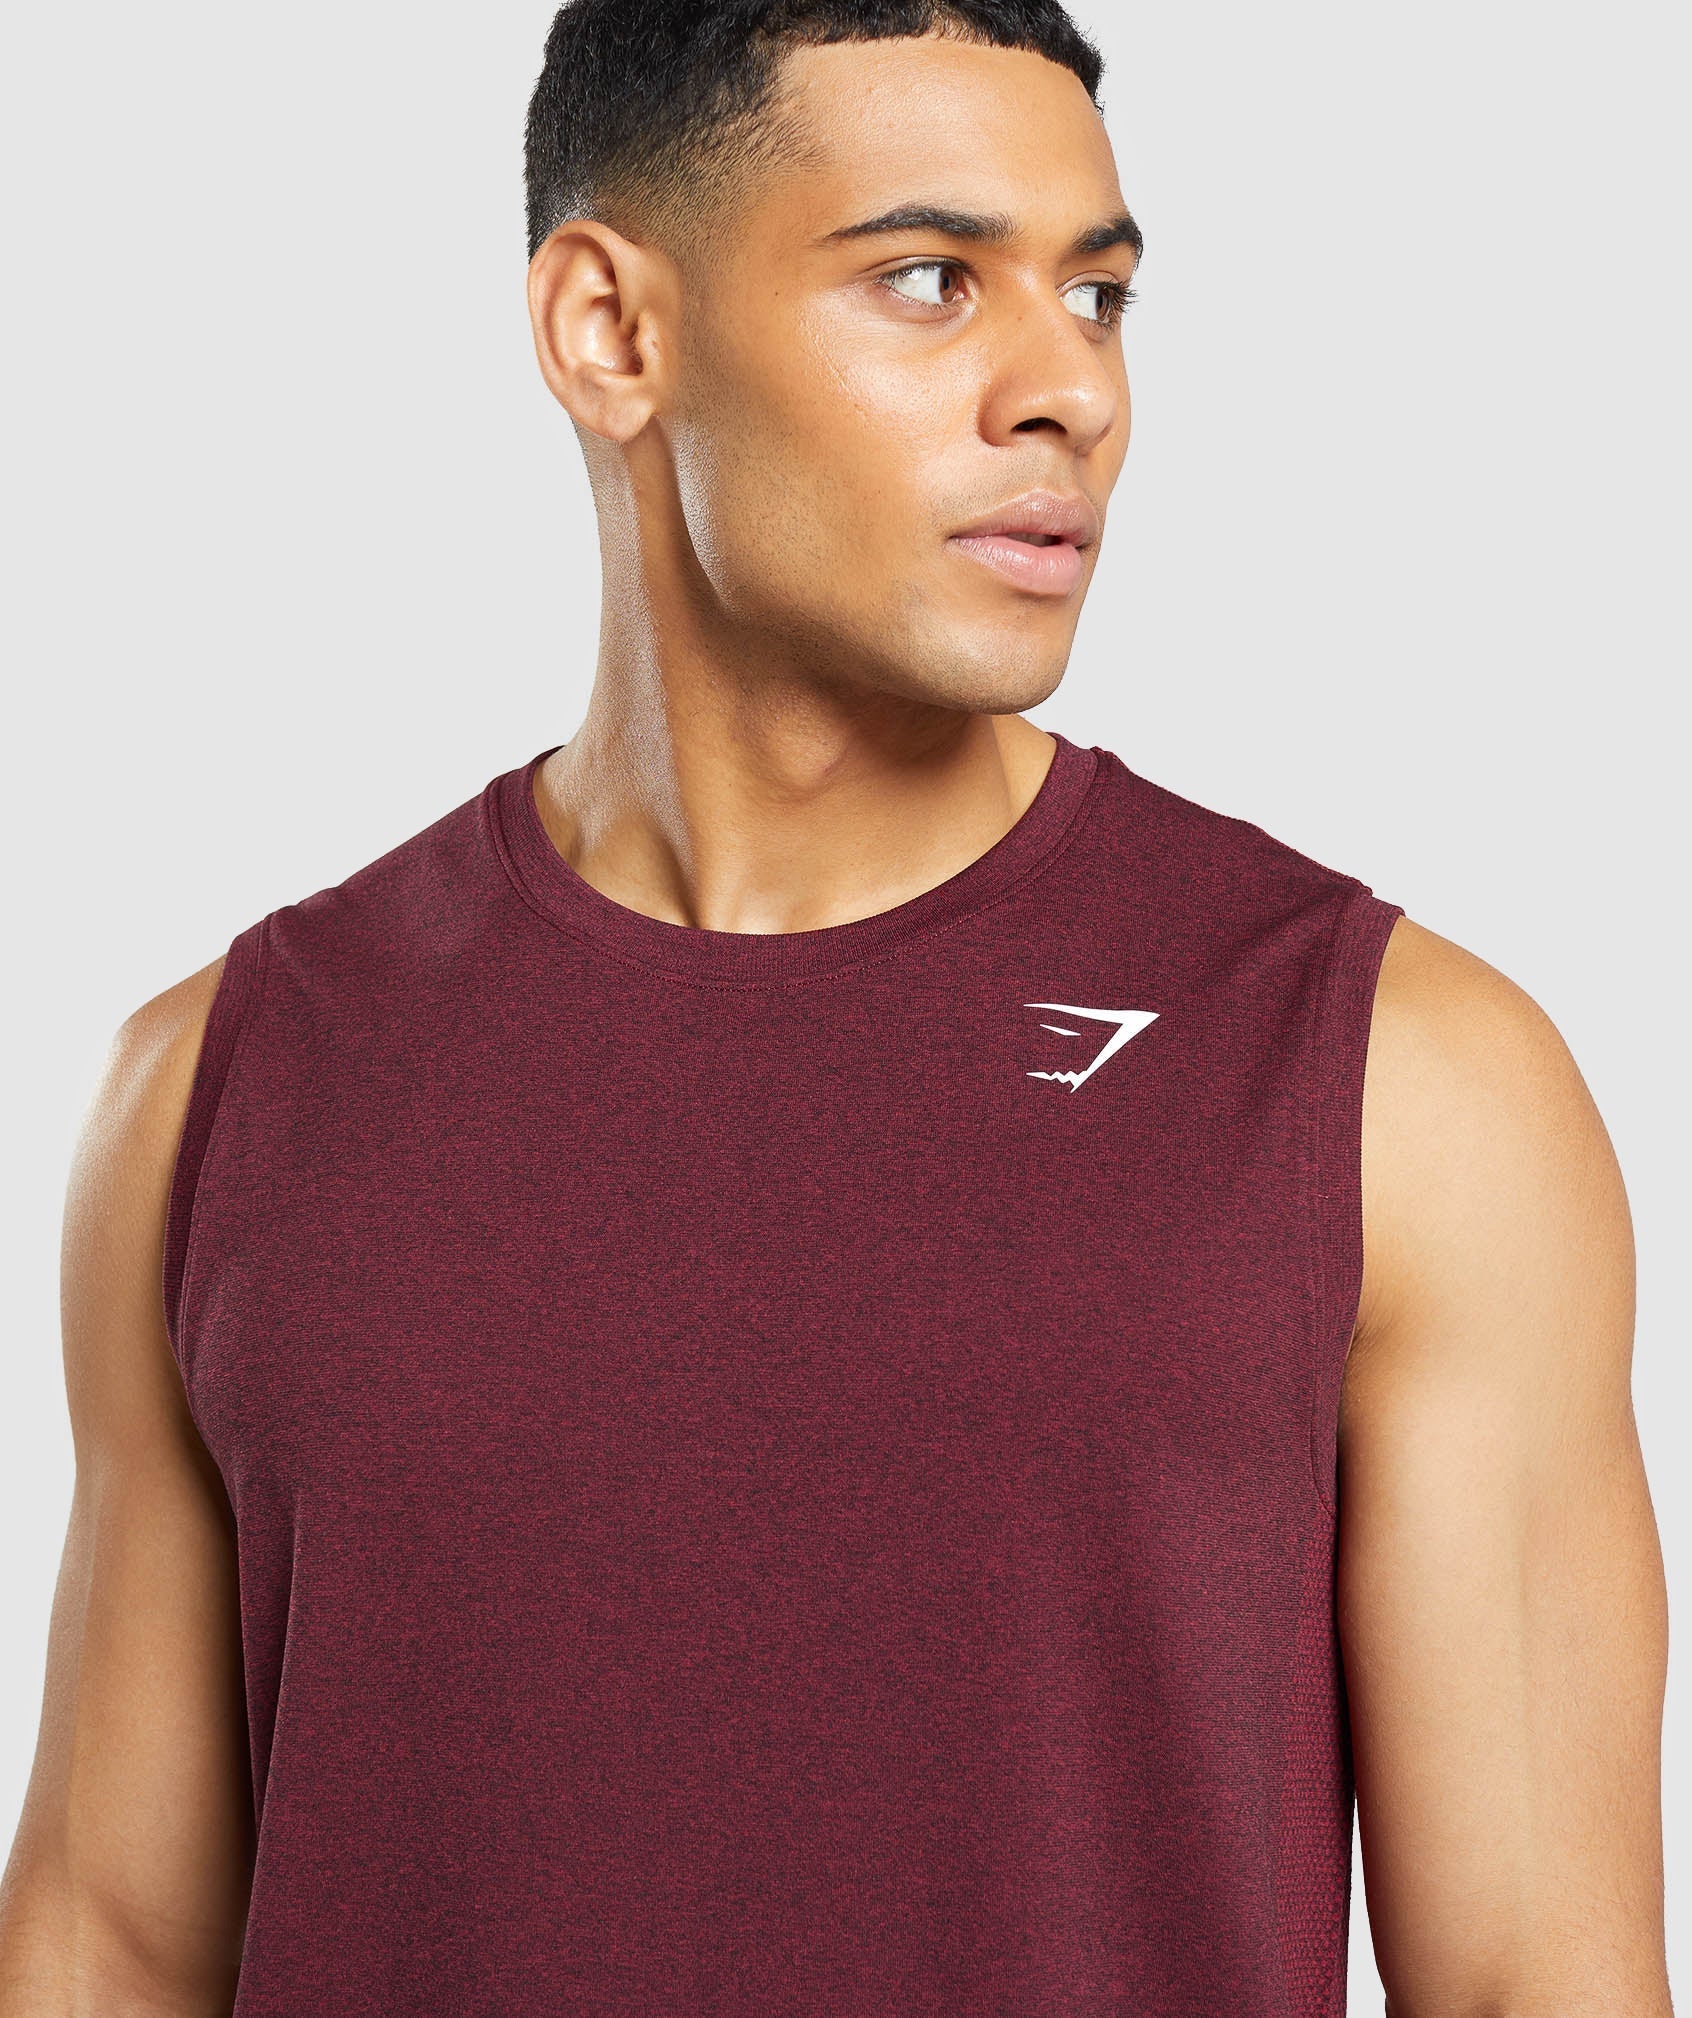 Arrival Seamless Tank in Burgundy Red Marl - view 7